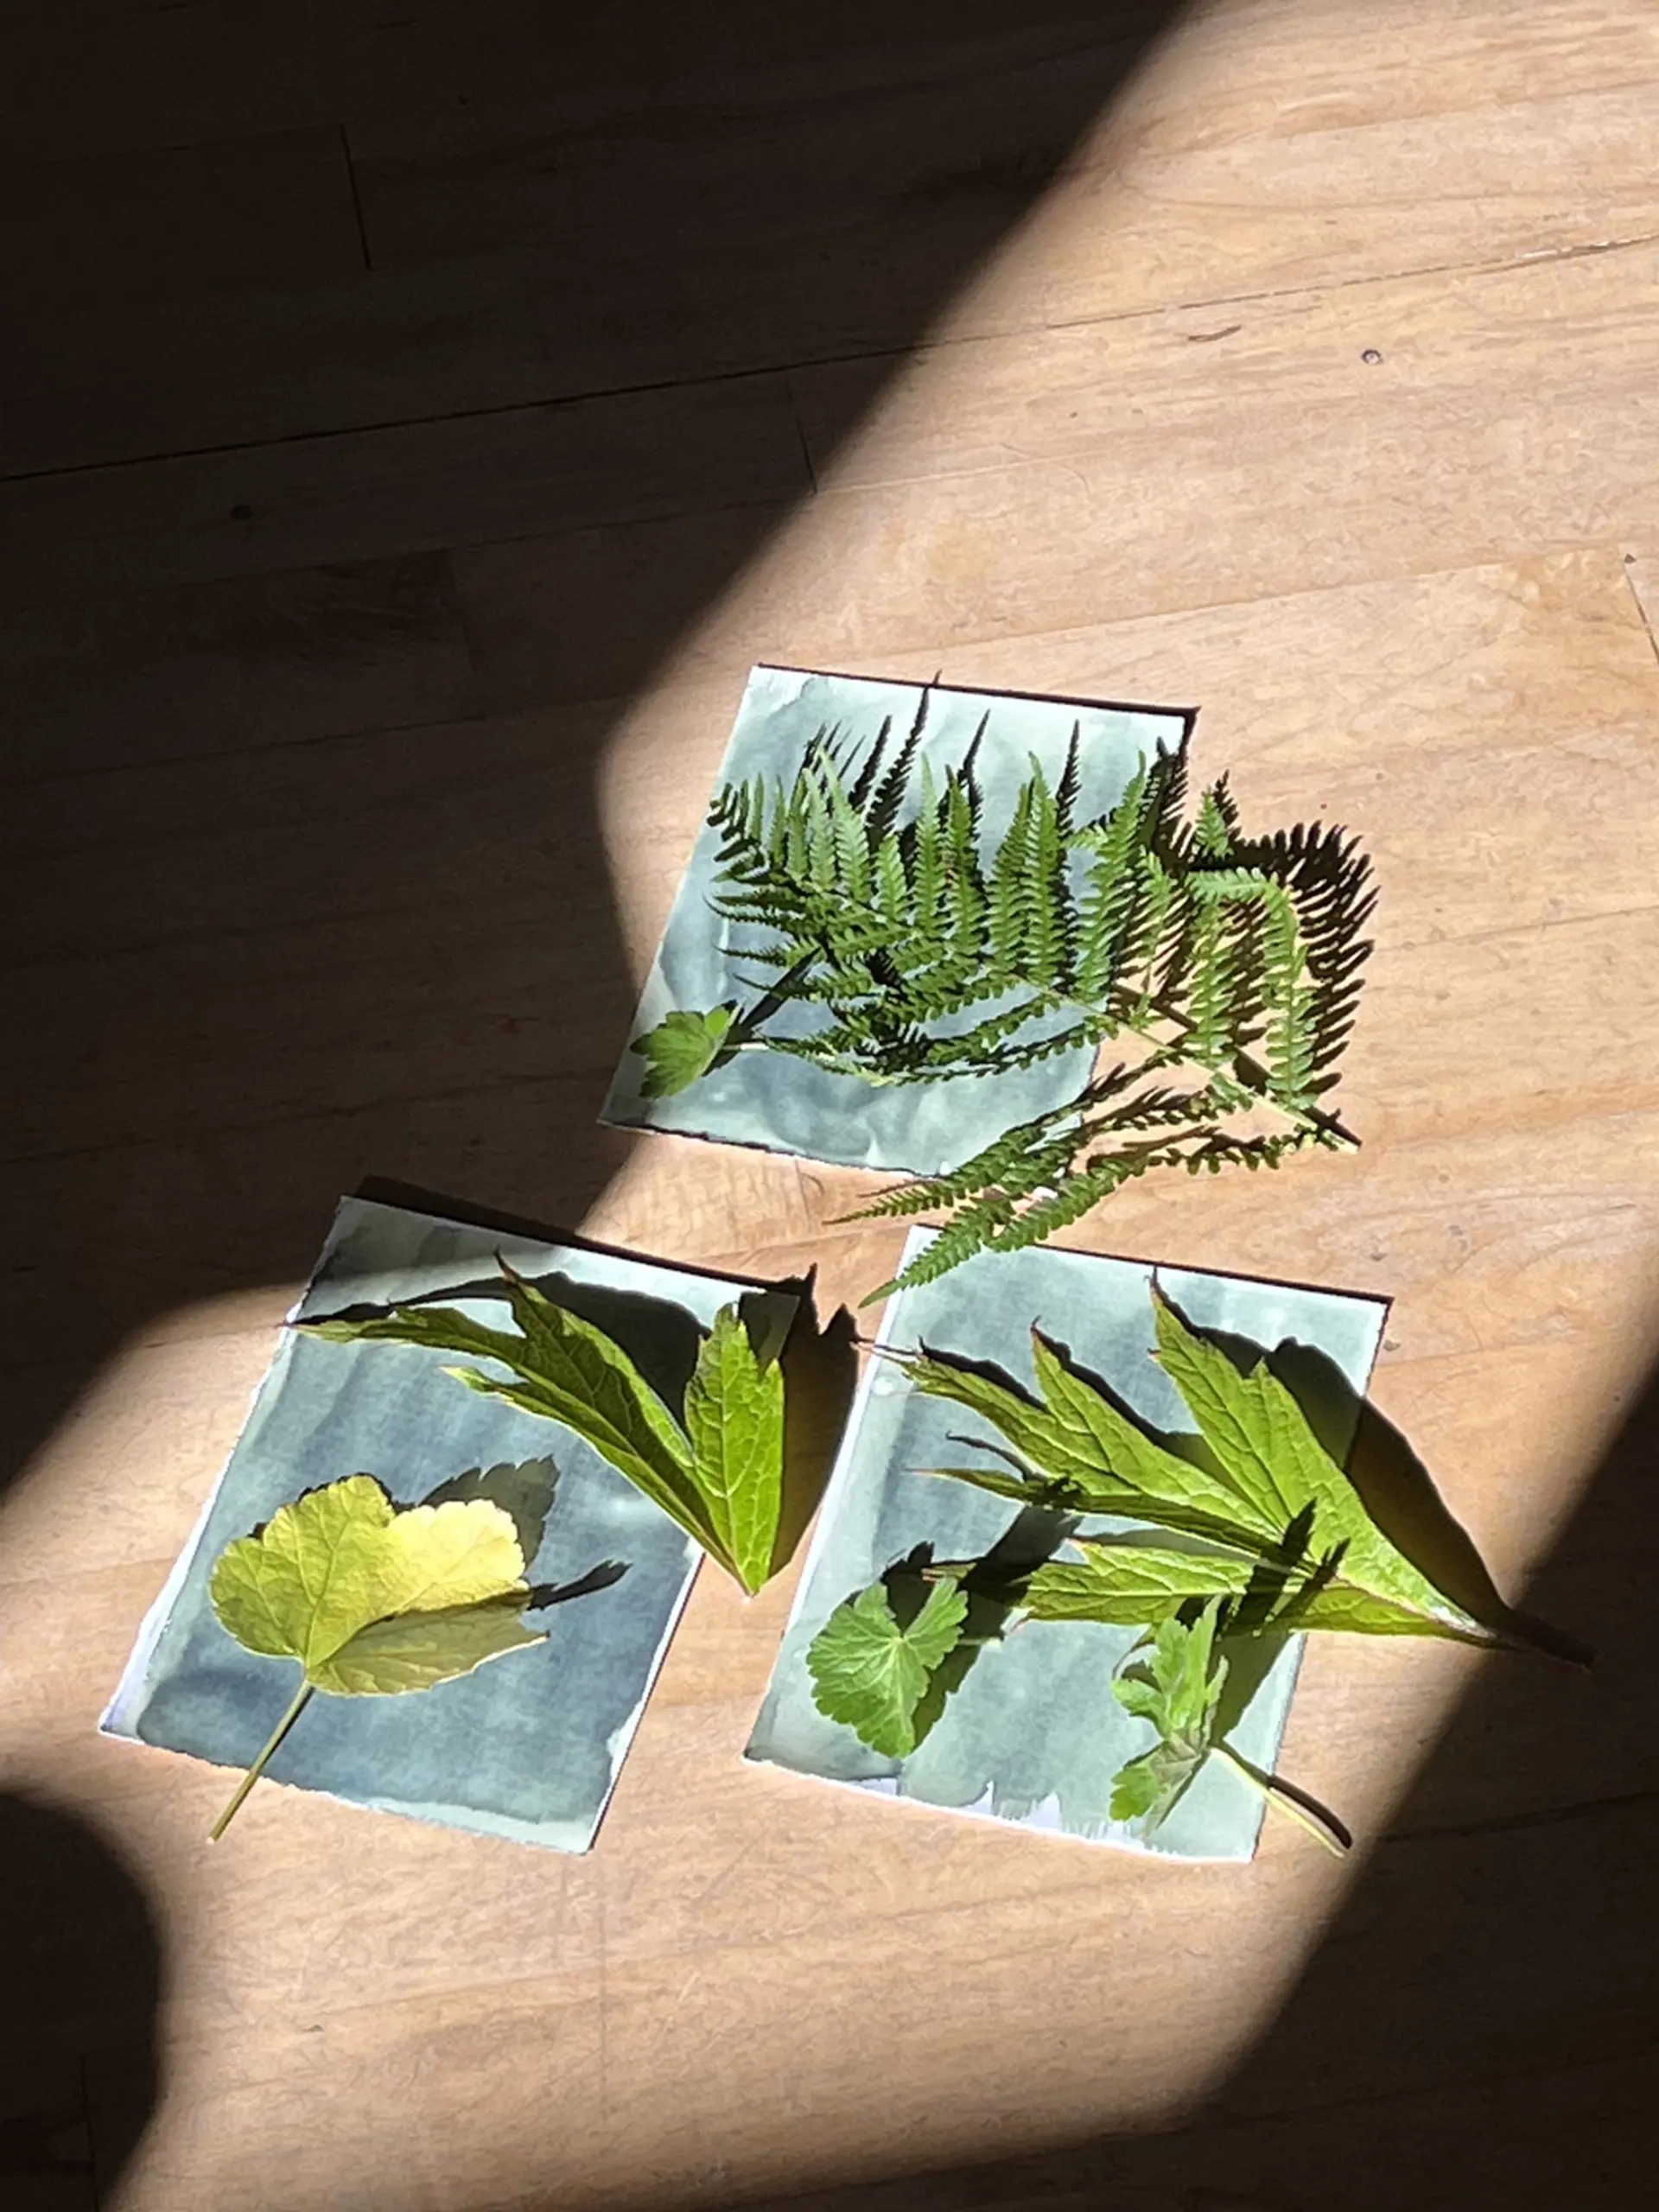 3 cyanotypes are developing with leaves creating shadows in the sun.